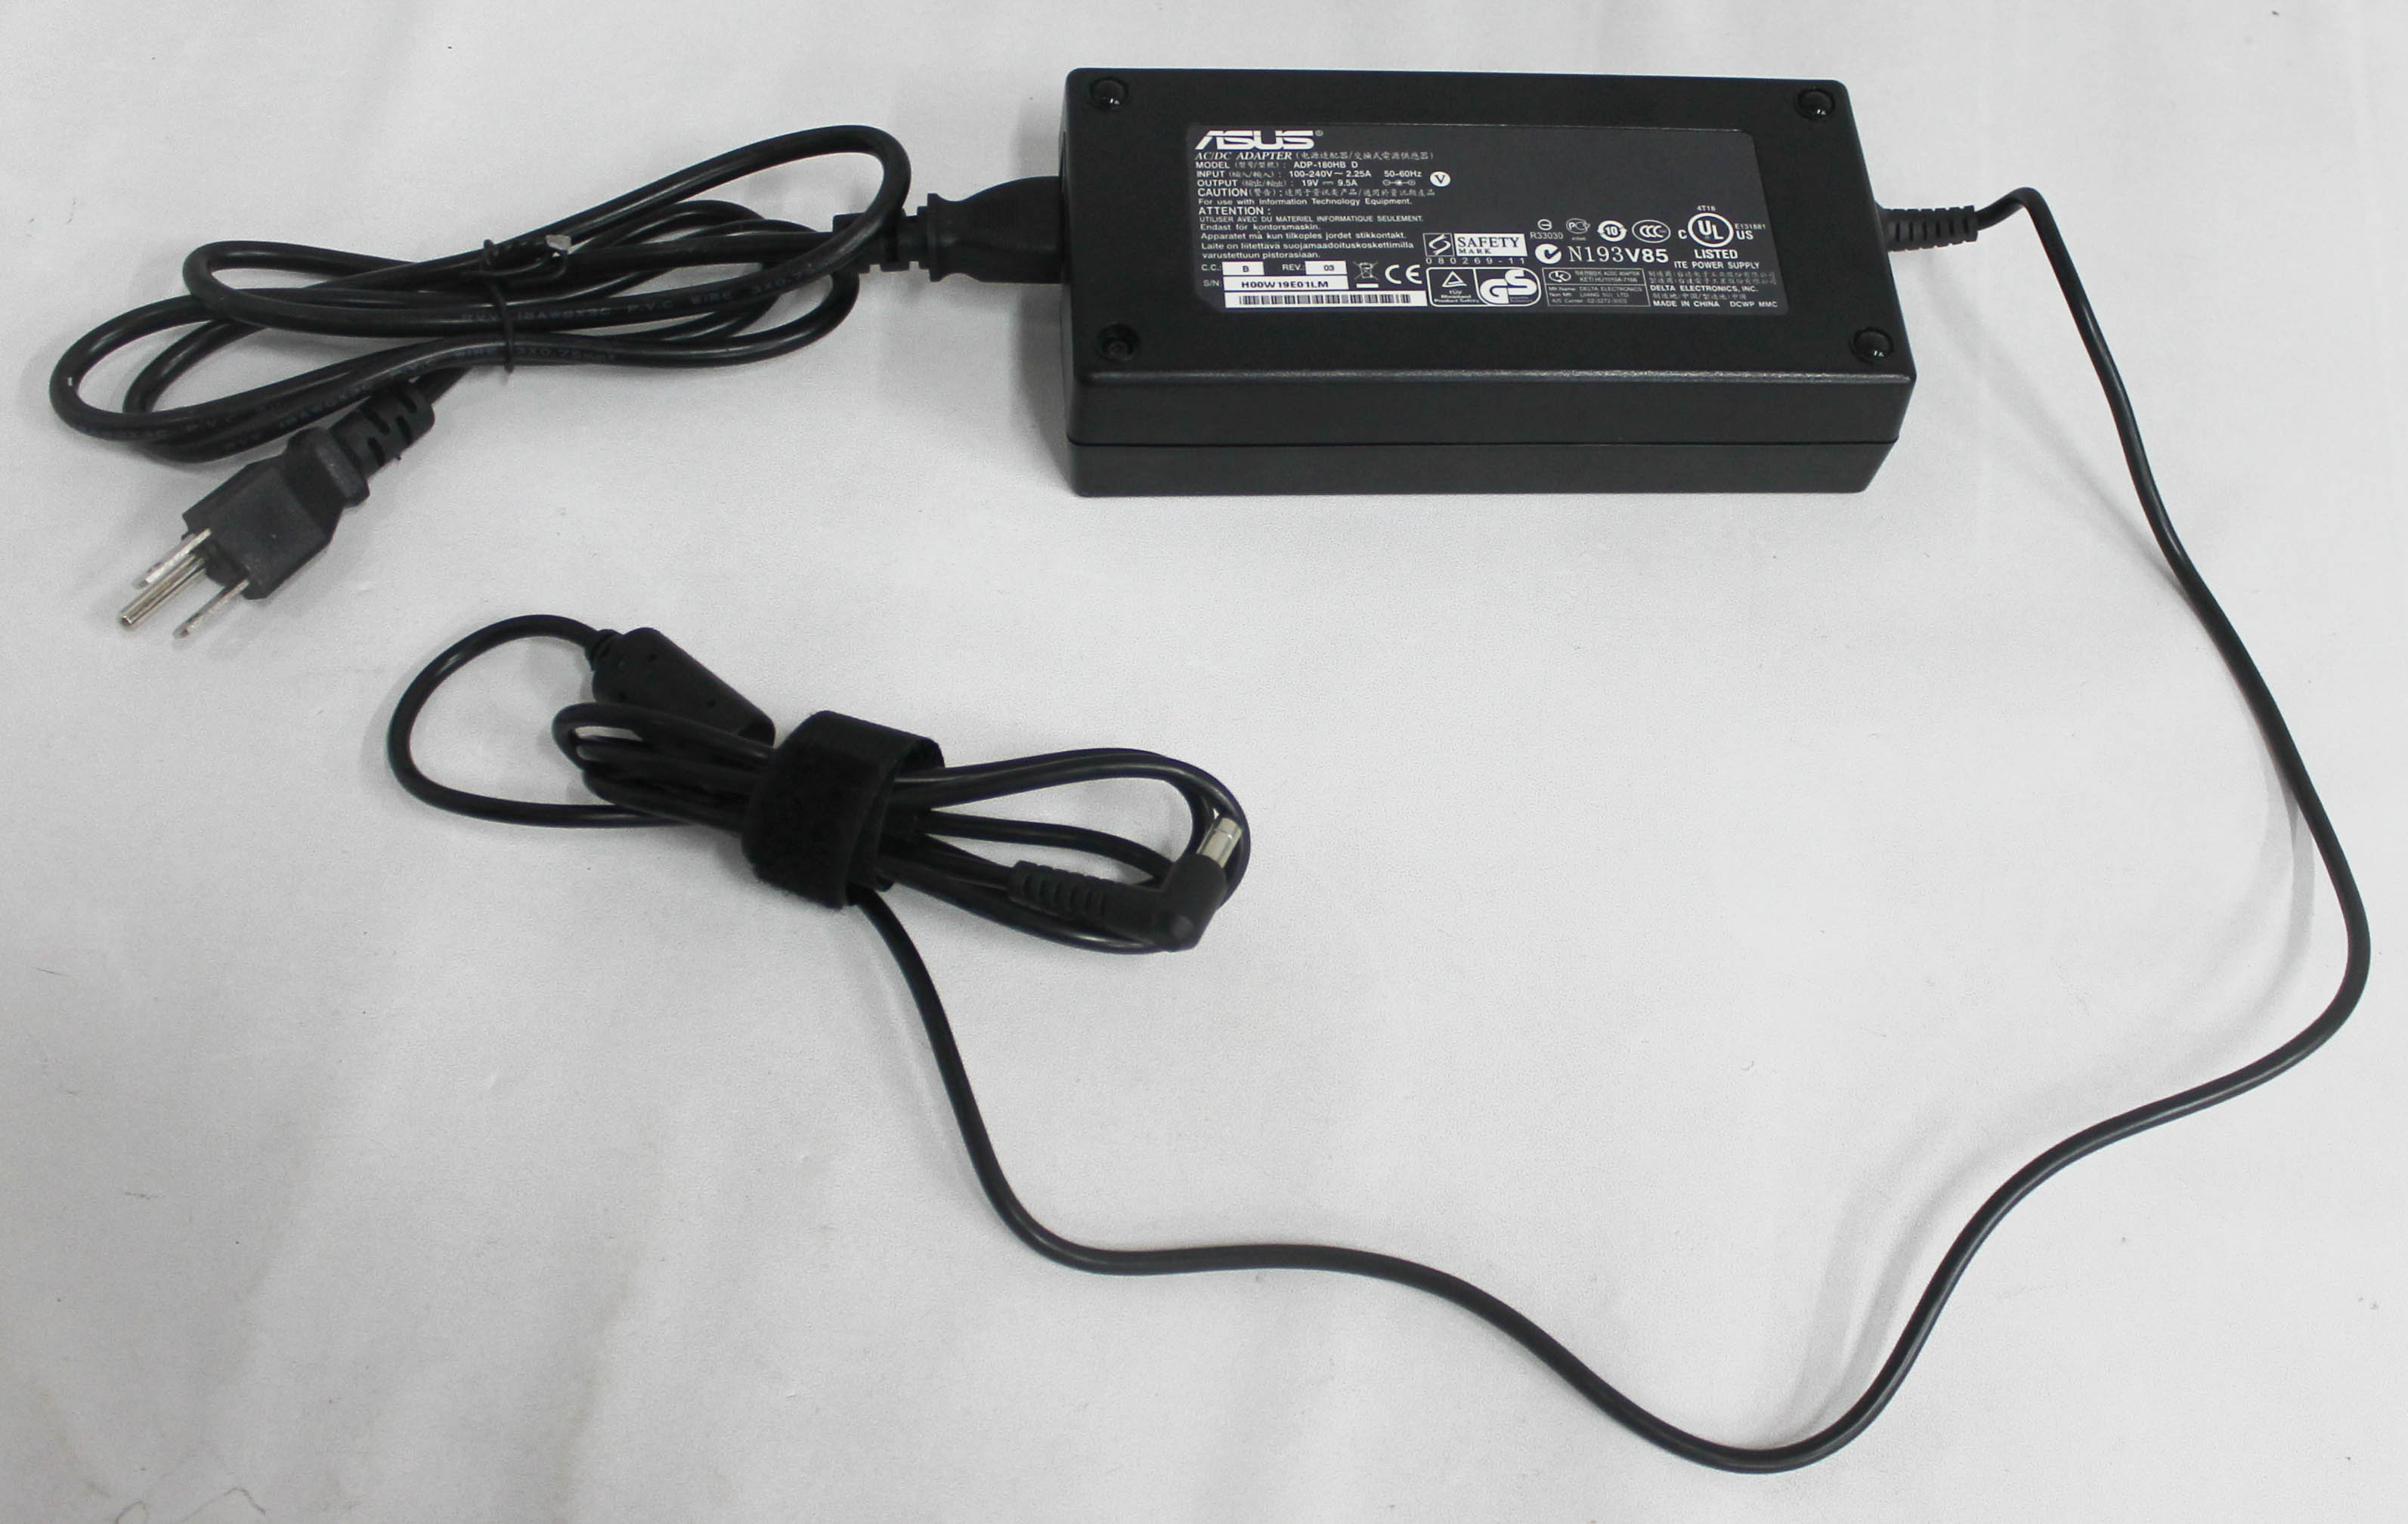 0A001-00260600, Asus Power Adapter 180W, 19.5V, 3-Pin, Black